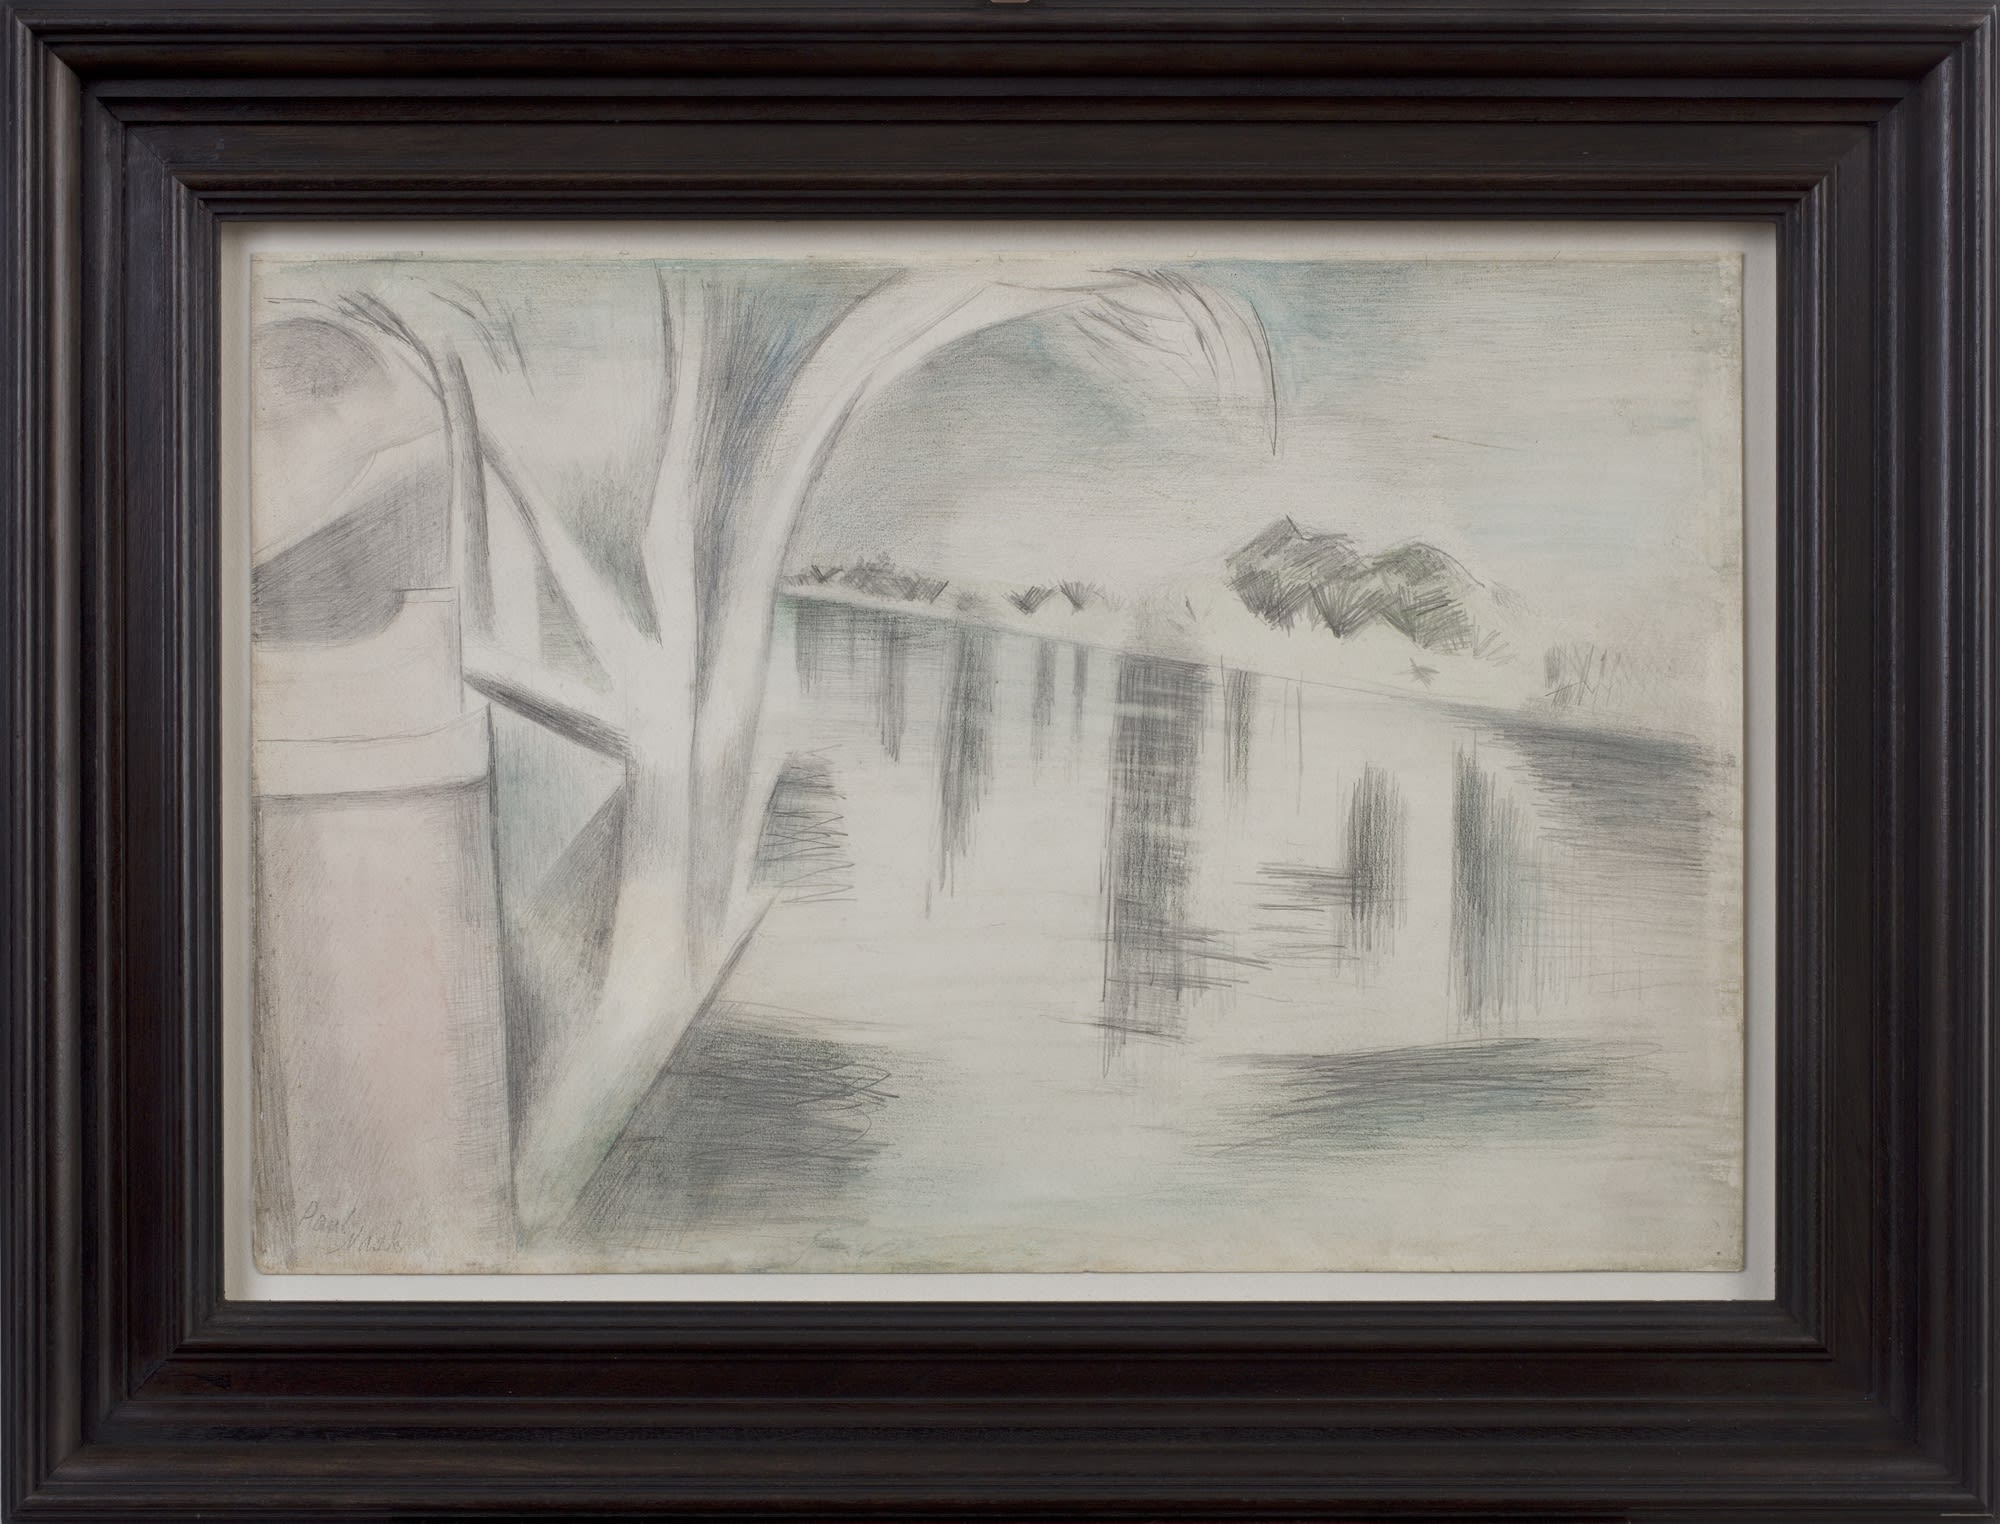 Paul Nash, River and Trees